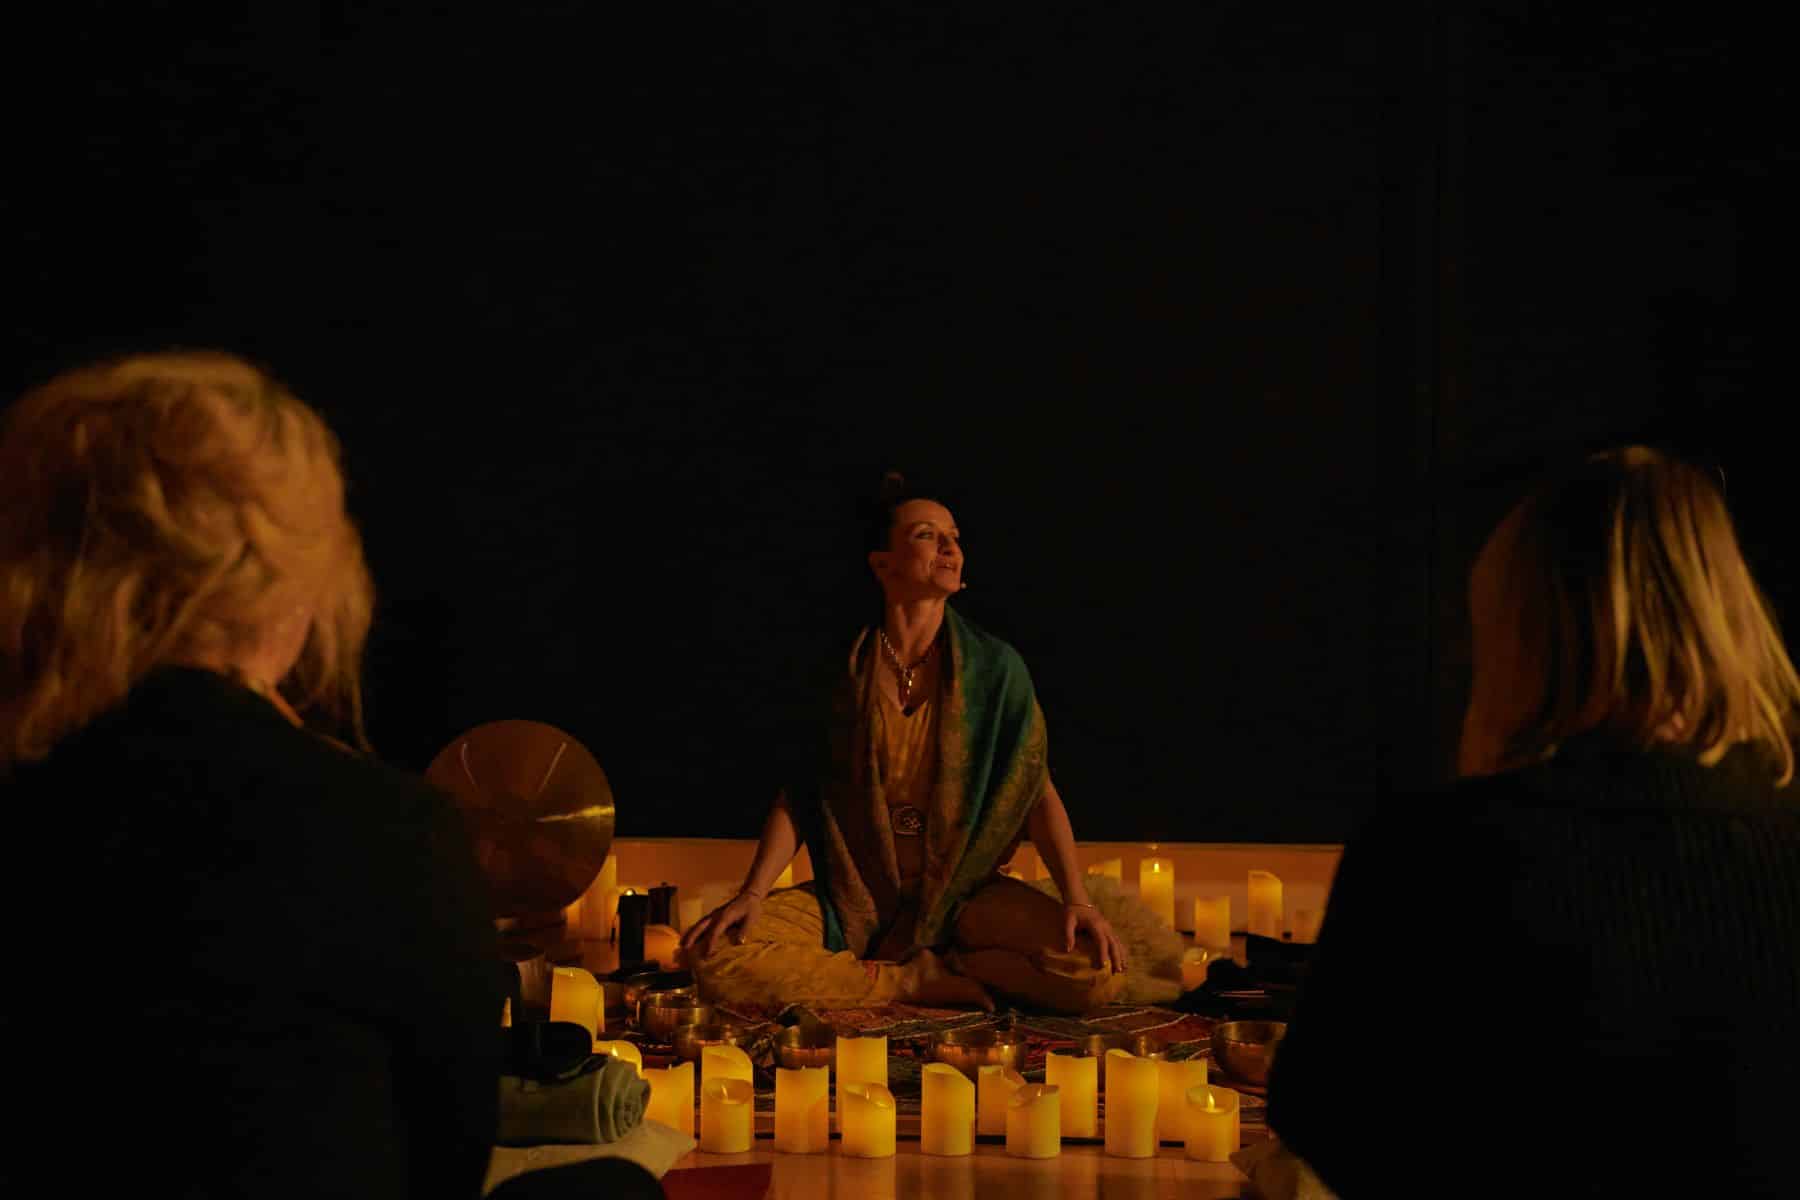 A woman in the center of the image instructing a Mindful Glow class surrounded by candles and two guests watching her.